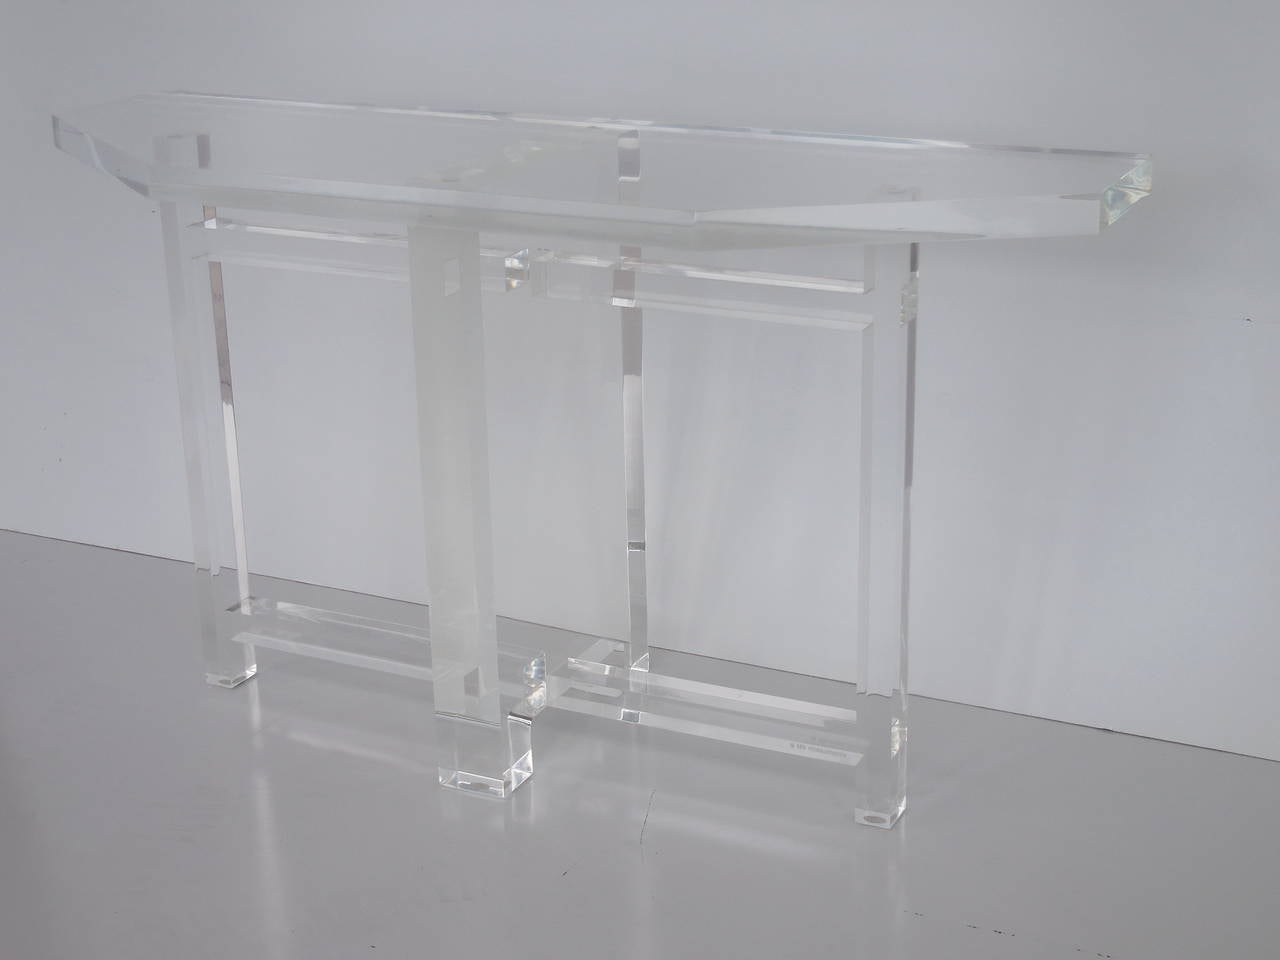 A solid Lucite console by Les Prismatiques. Superb craftsmanship, made of thick slabs with an architectural design. Superb craftsmanship and design. The center slab is 3